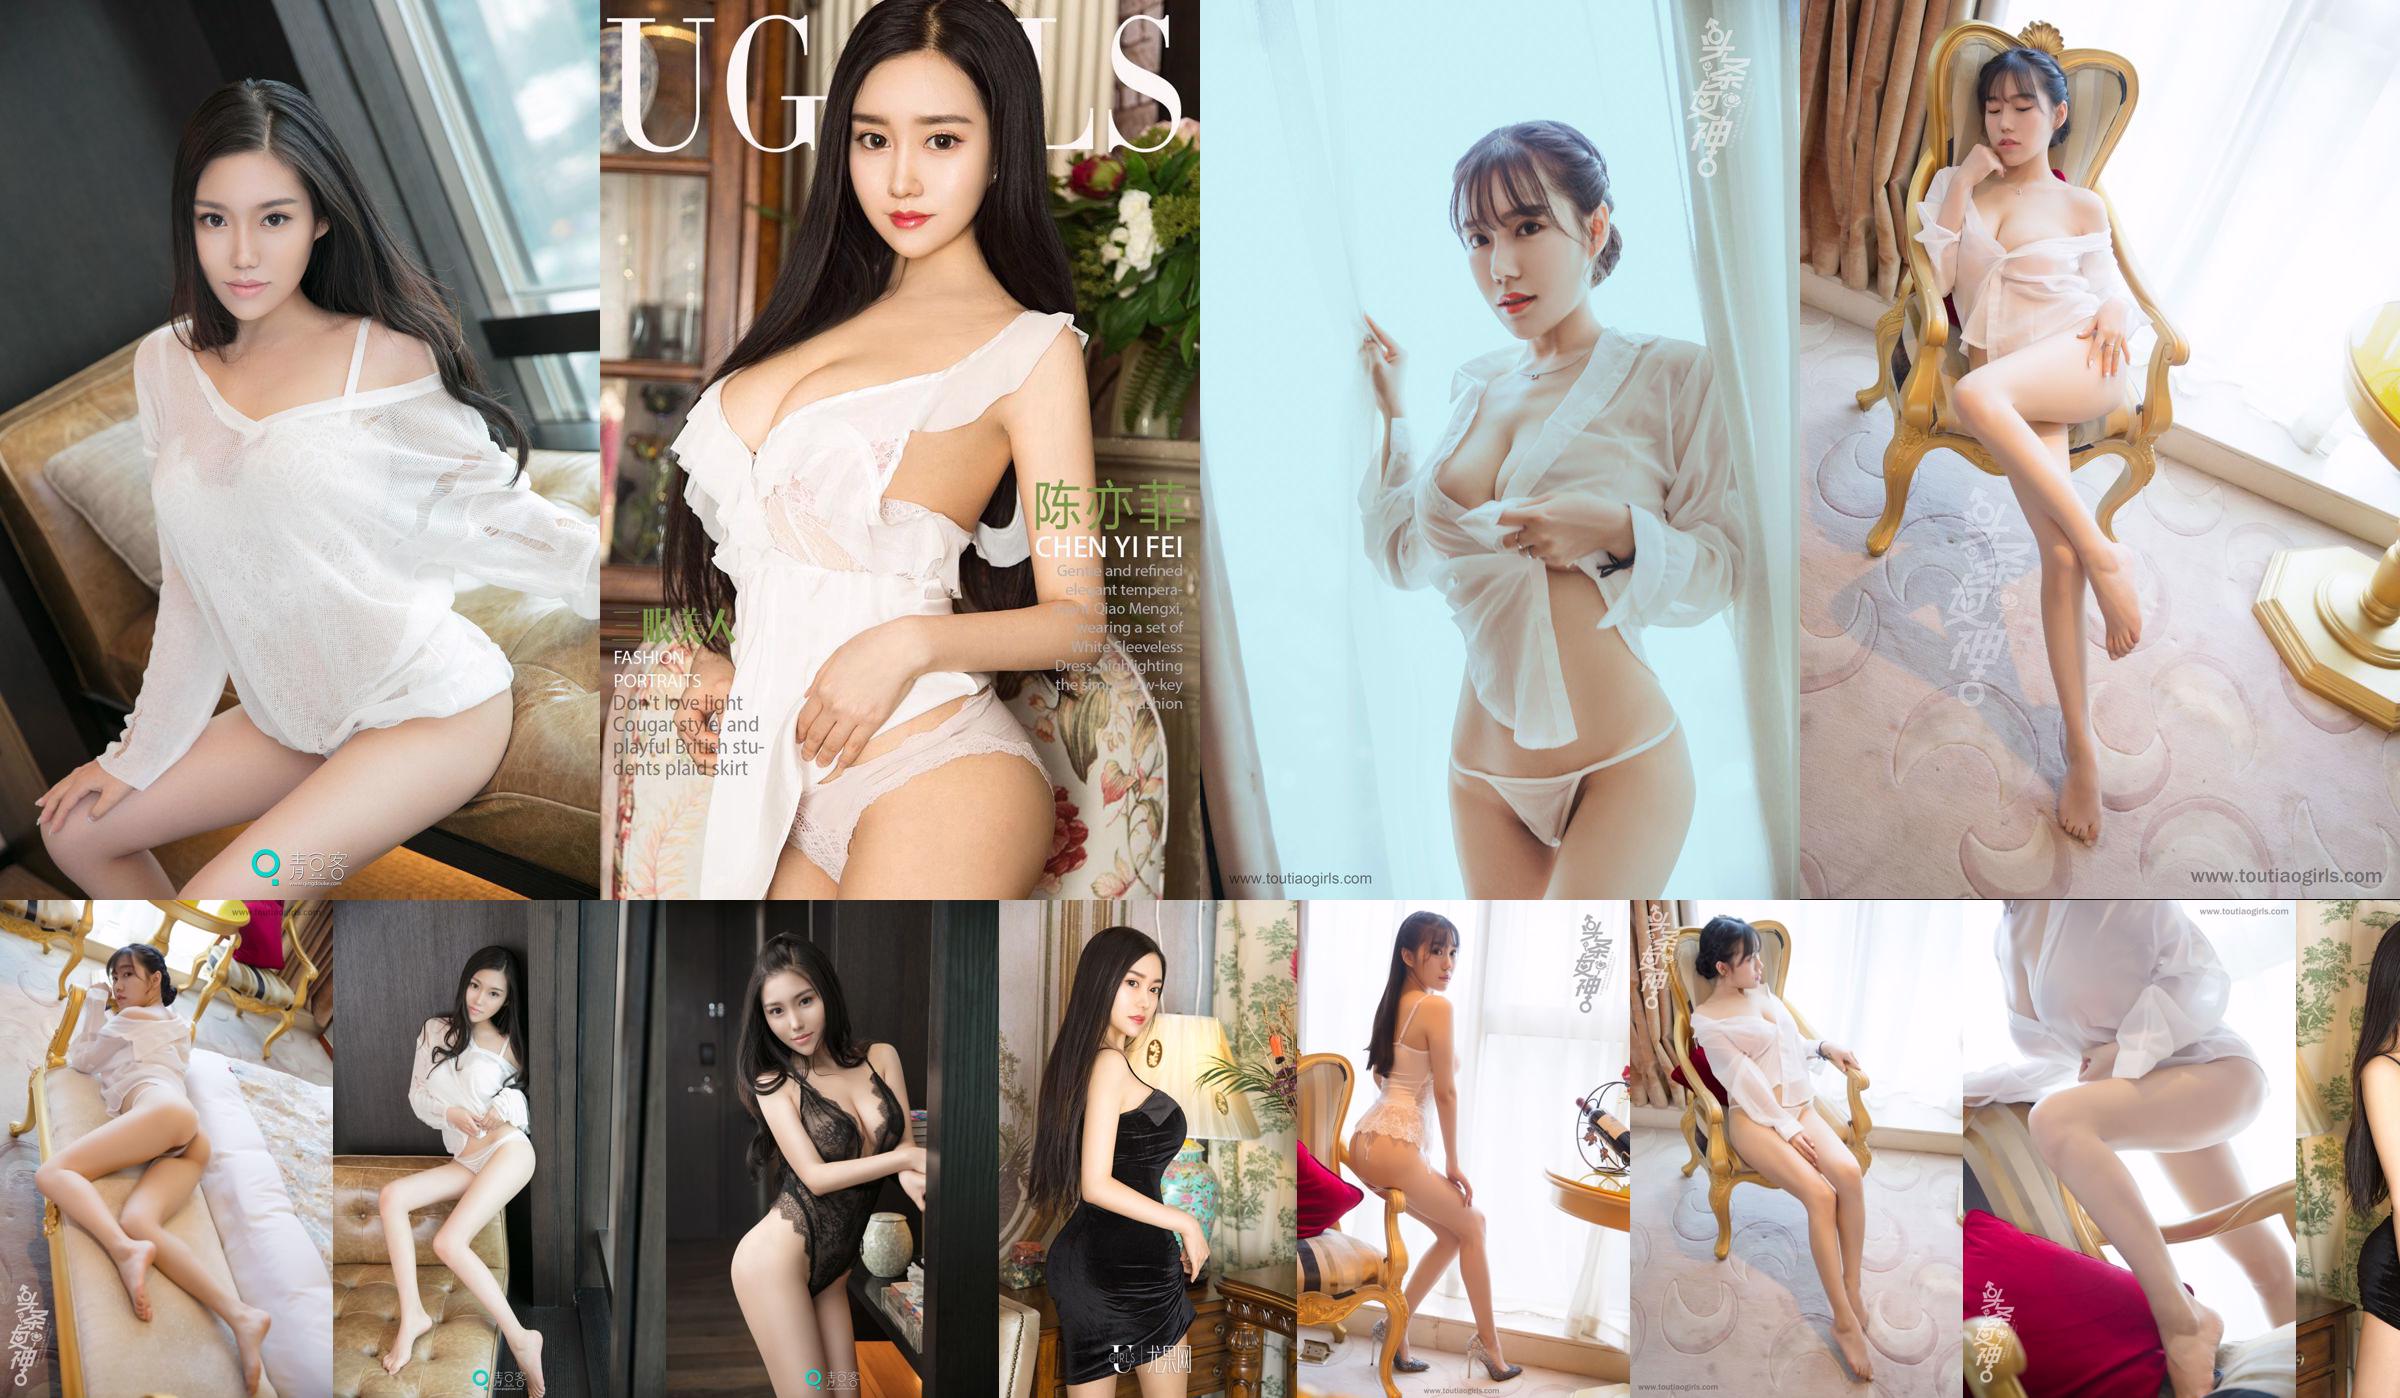 [Delivery WordGirls] No.826 Chen Yifei & Xuanzi Red Lingerie Model Collection No.80bf06 Página 1